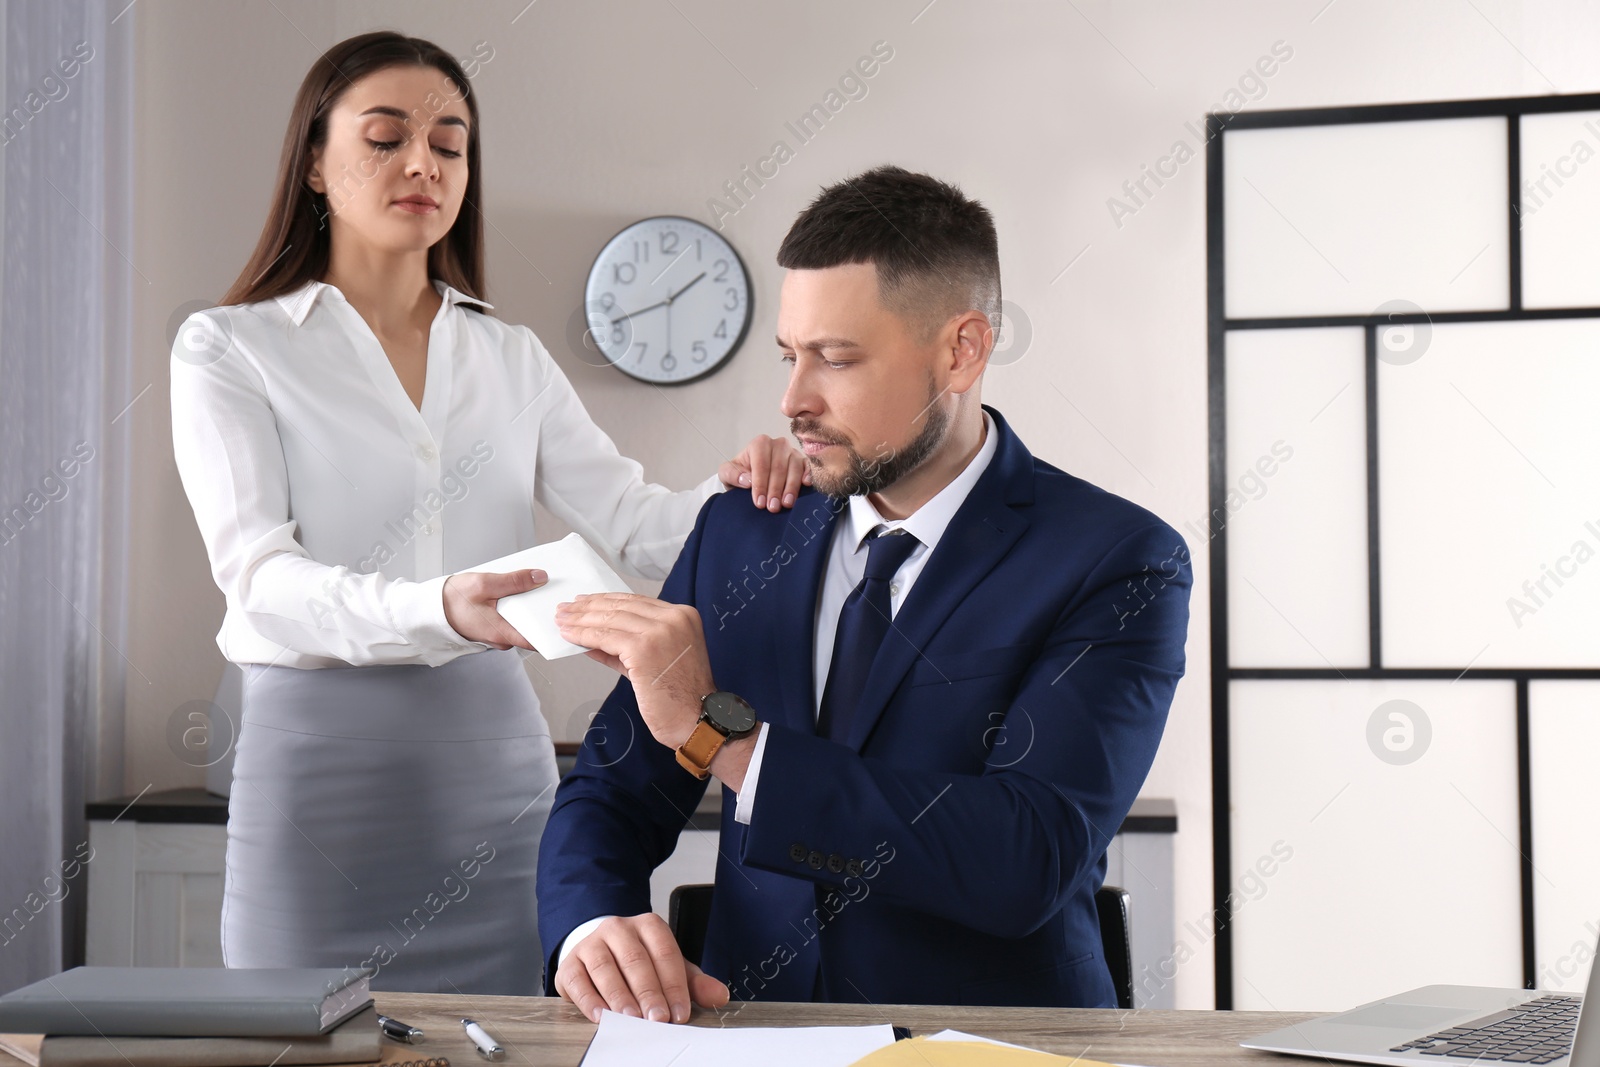 Photo of Woman giving bribe to man at table in office